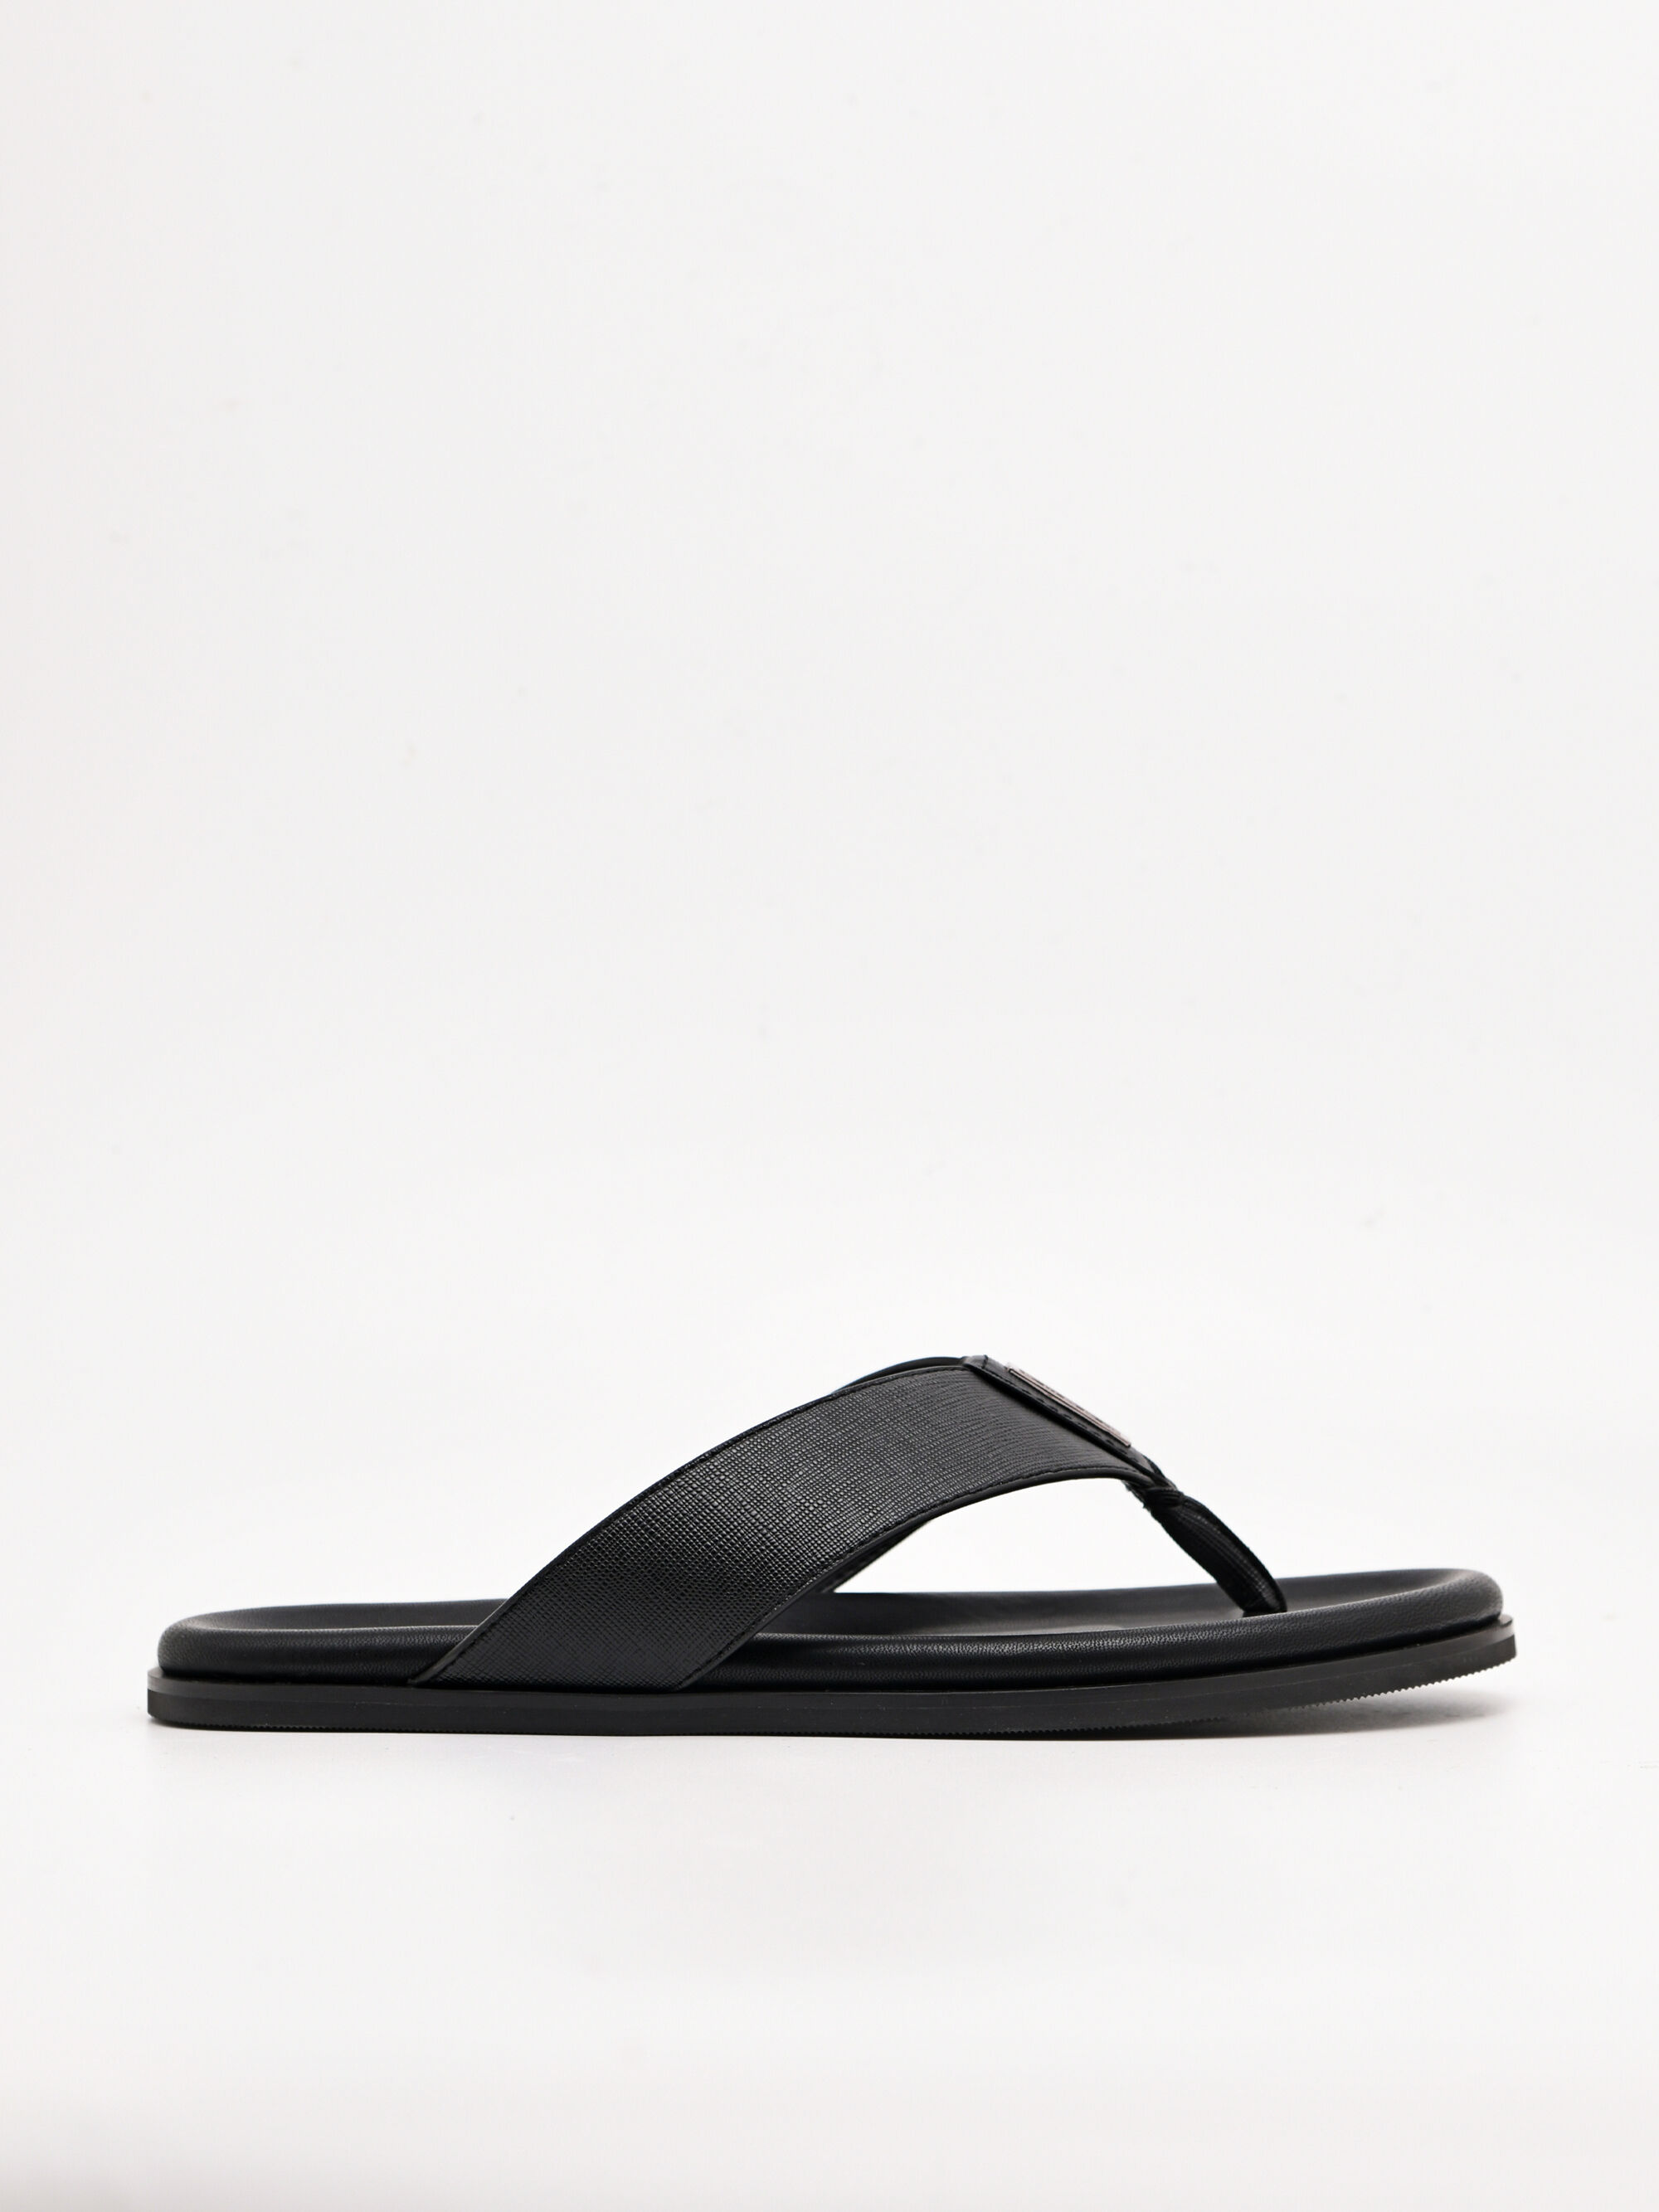 I love these thong sandals with my black pedi : r/thongsandals